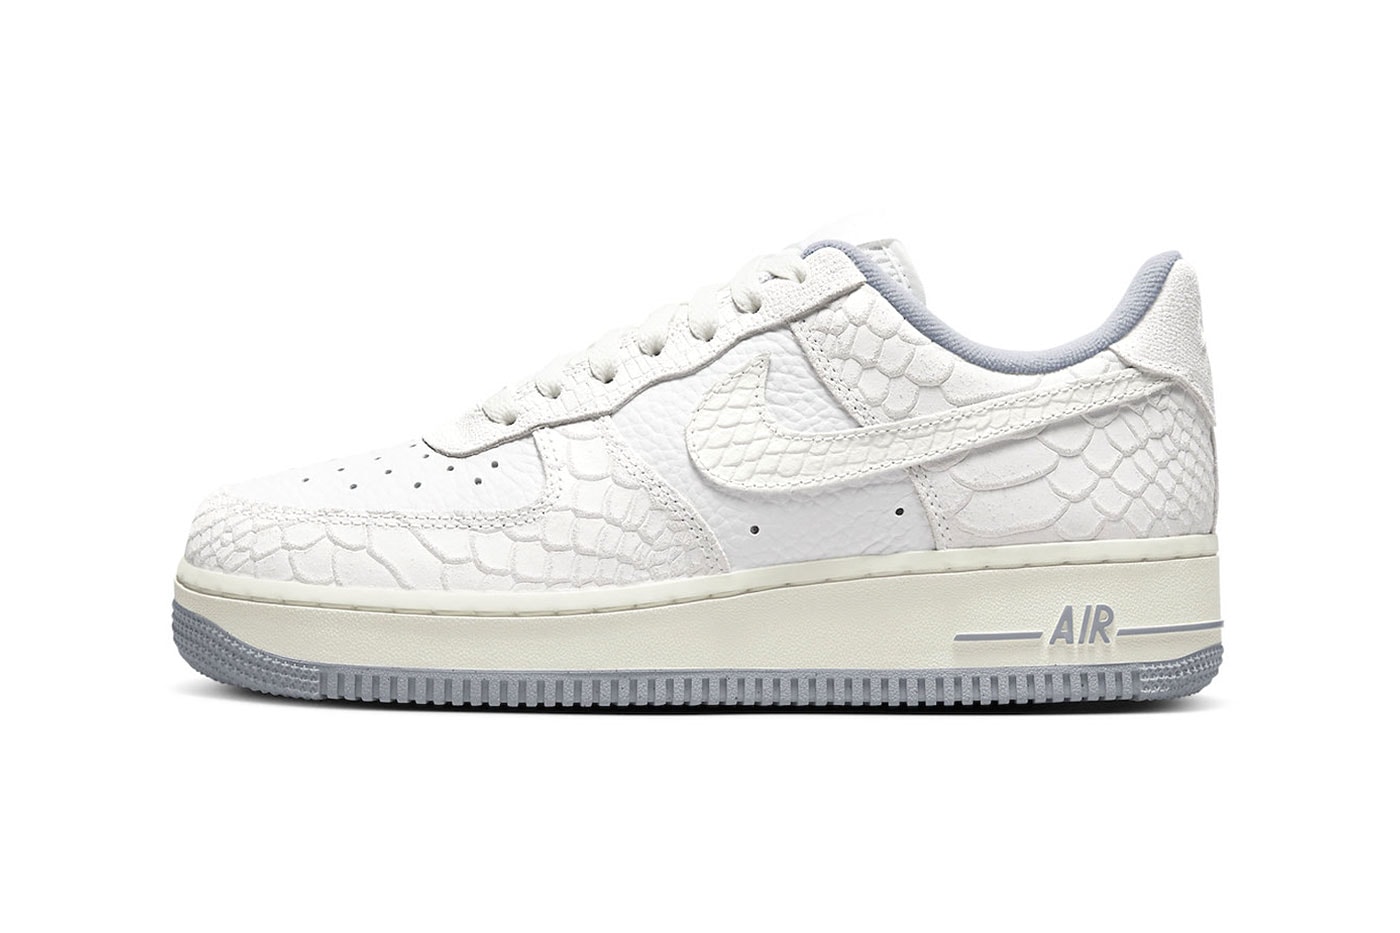 White Air Force 1 Shoes.